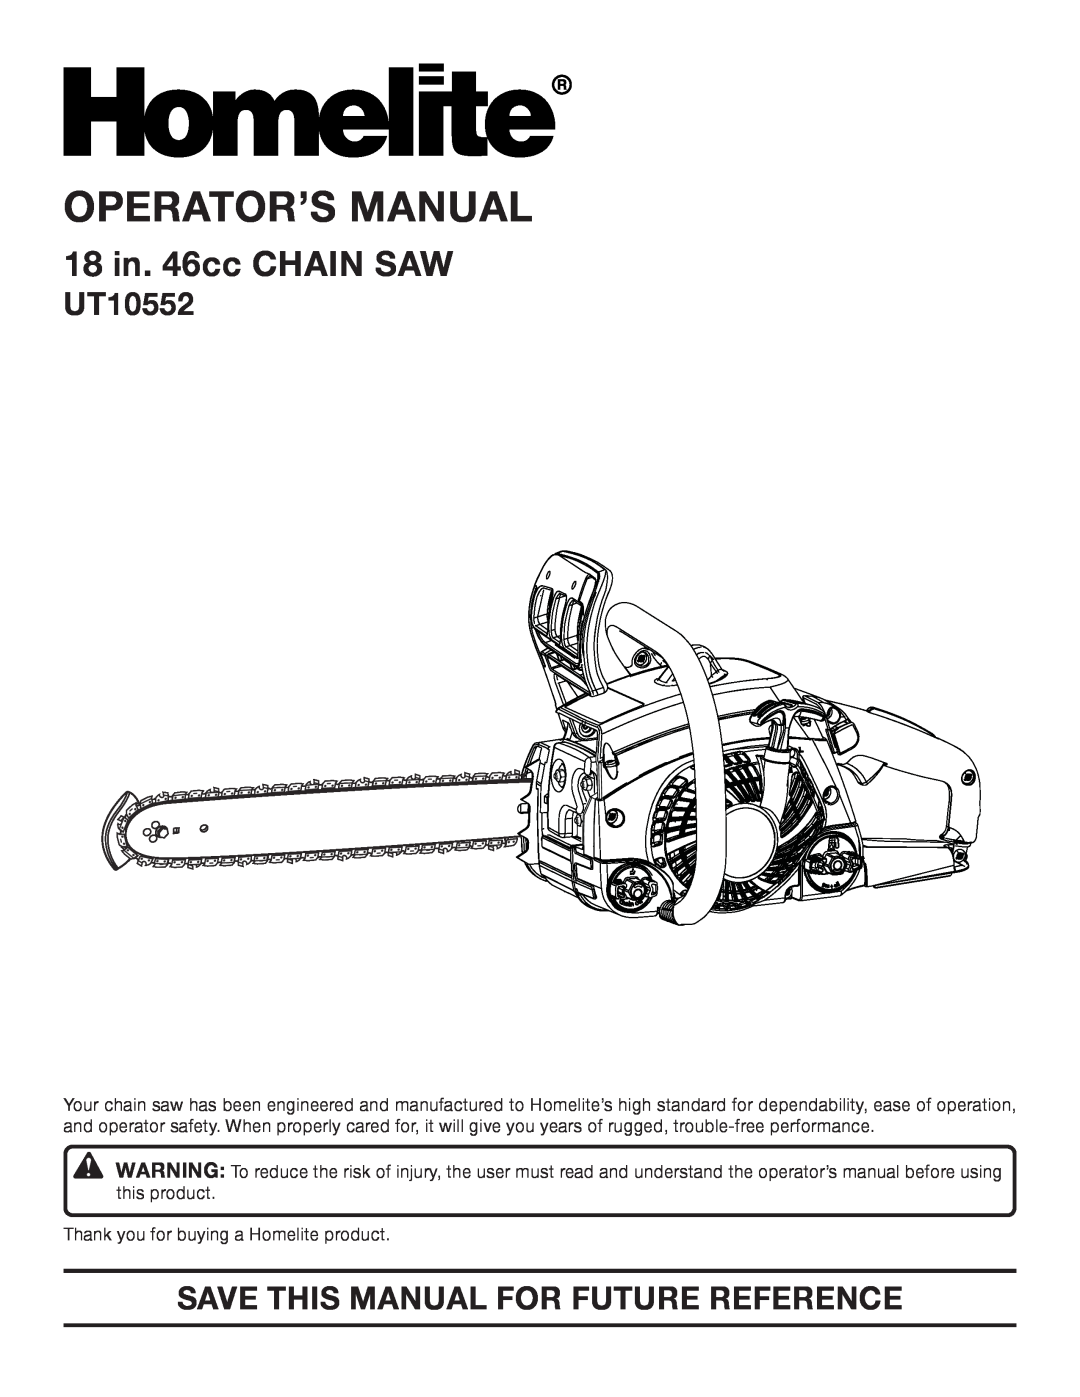 Homelite UT10552 manual Operator’S Manual, 18 in. 46cc CHAIN SAW, Save This Manual For Future Reference 